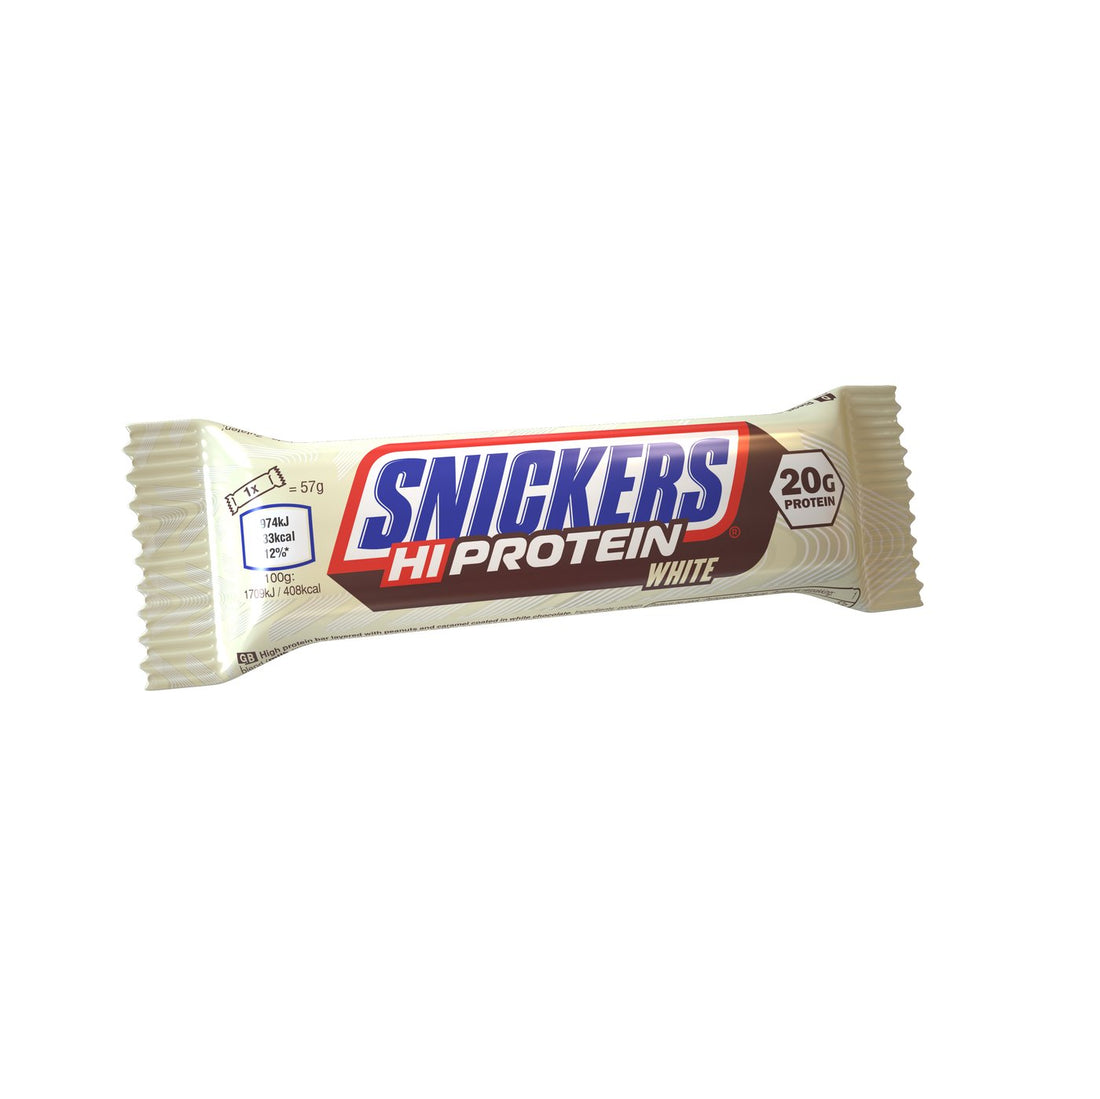 Snickers Hi Protein Bar White 57g